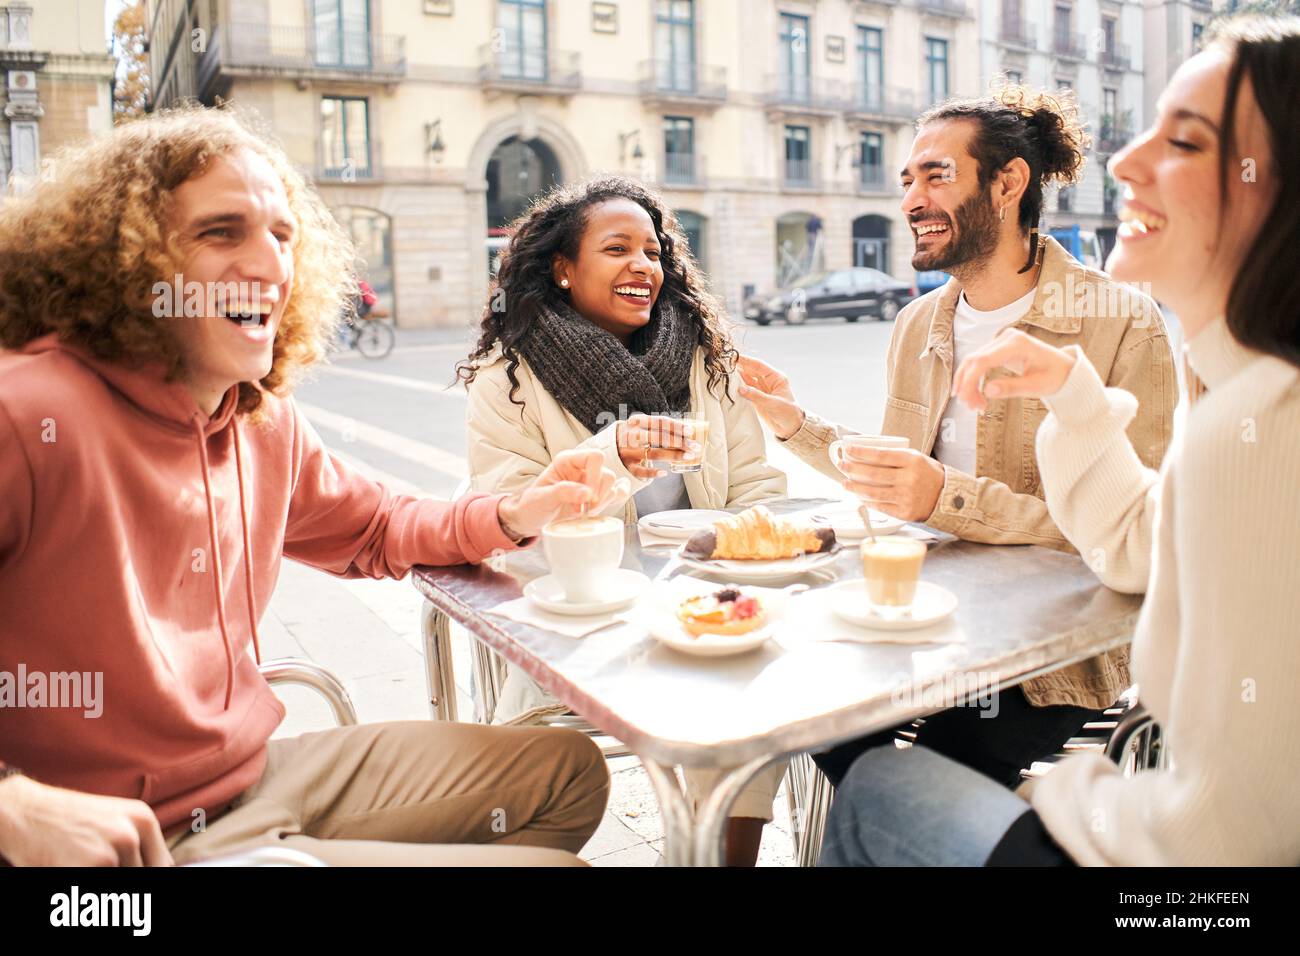 Friends group toasting latte at coffee bar terrace. Group of people talking and having fun together at cappuccino restaurant. Lifestyle concept with Stock Photo